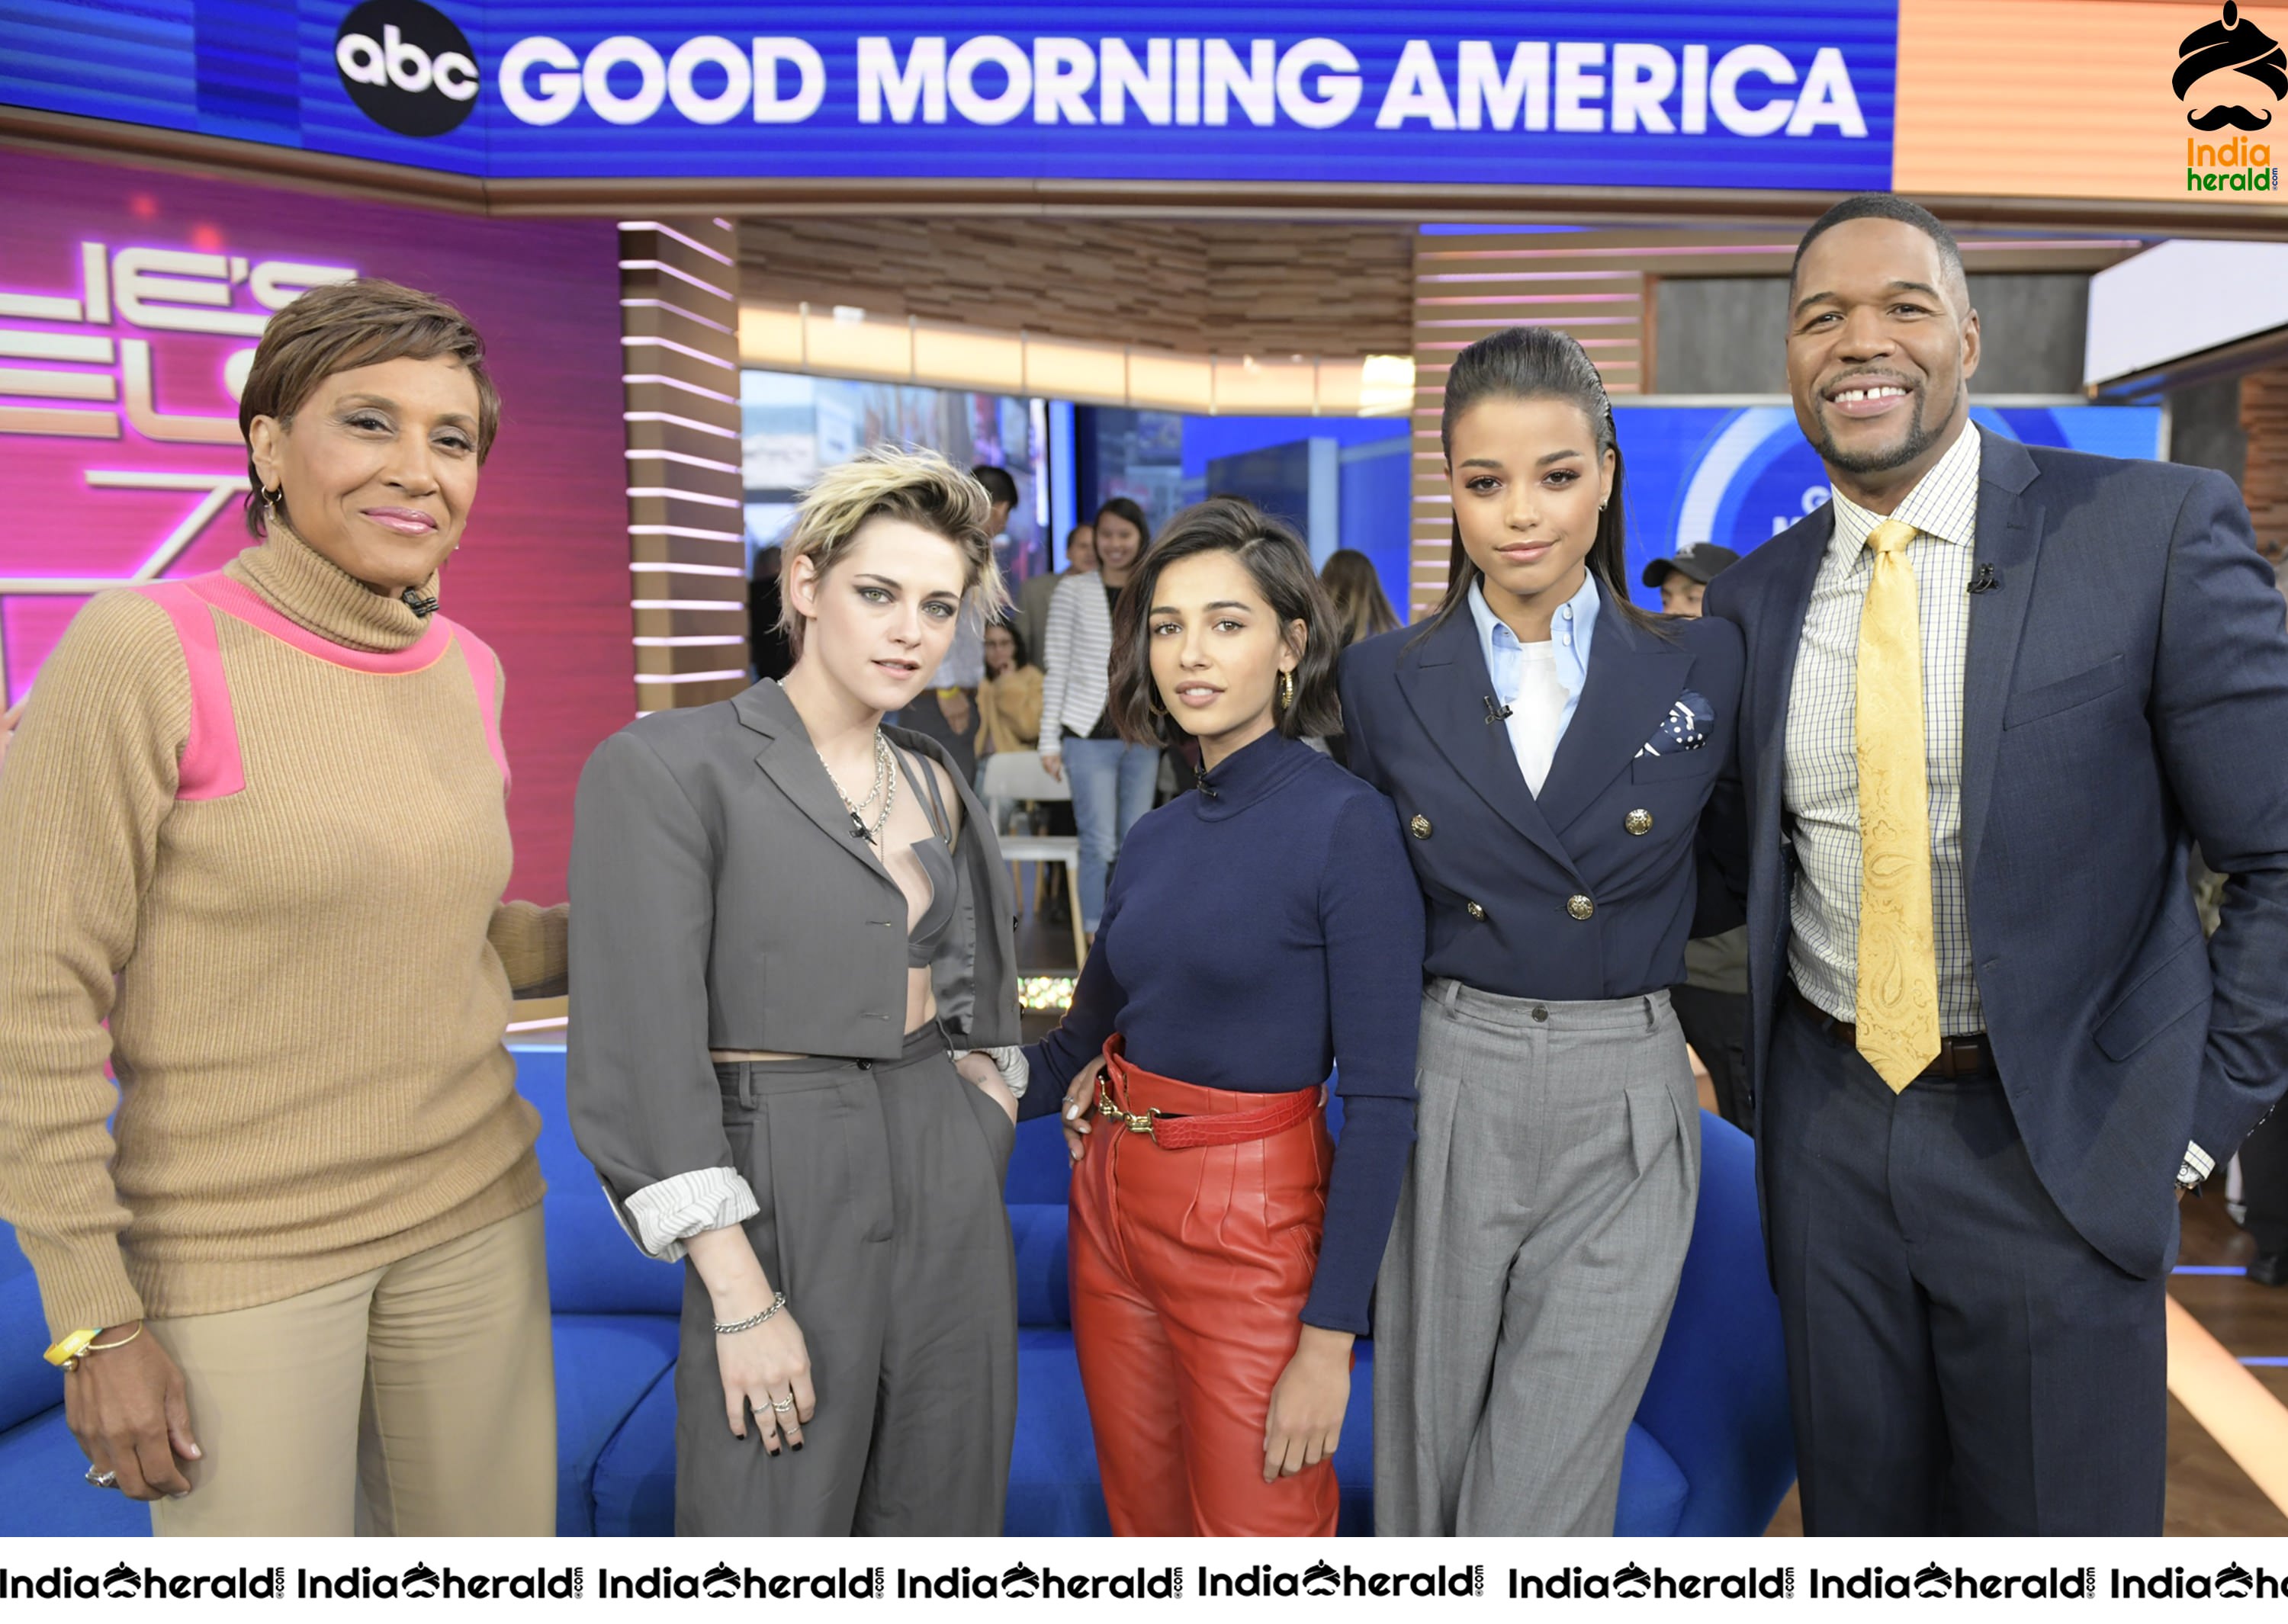 Charlies Angeles Actresses at Good Morning America Show